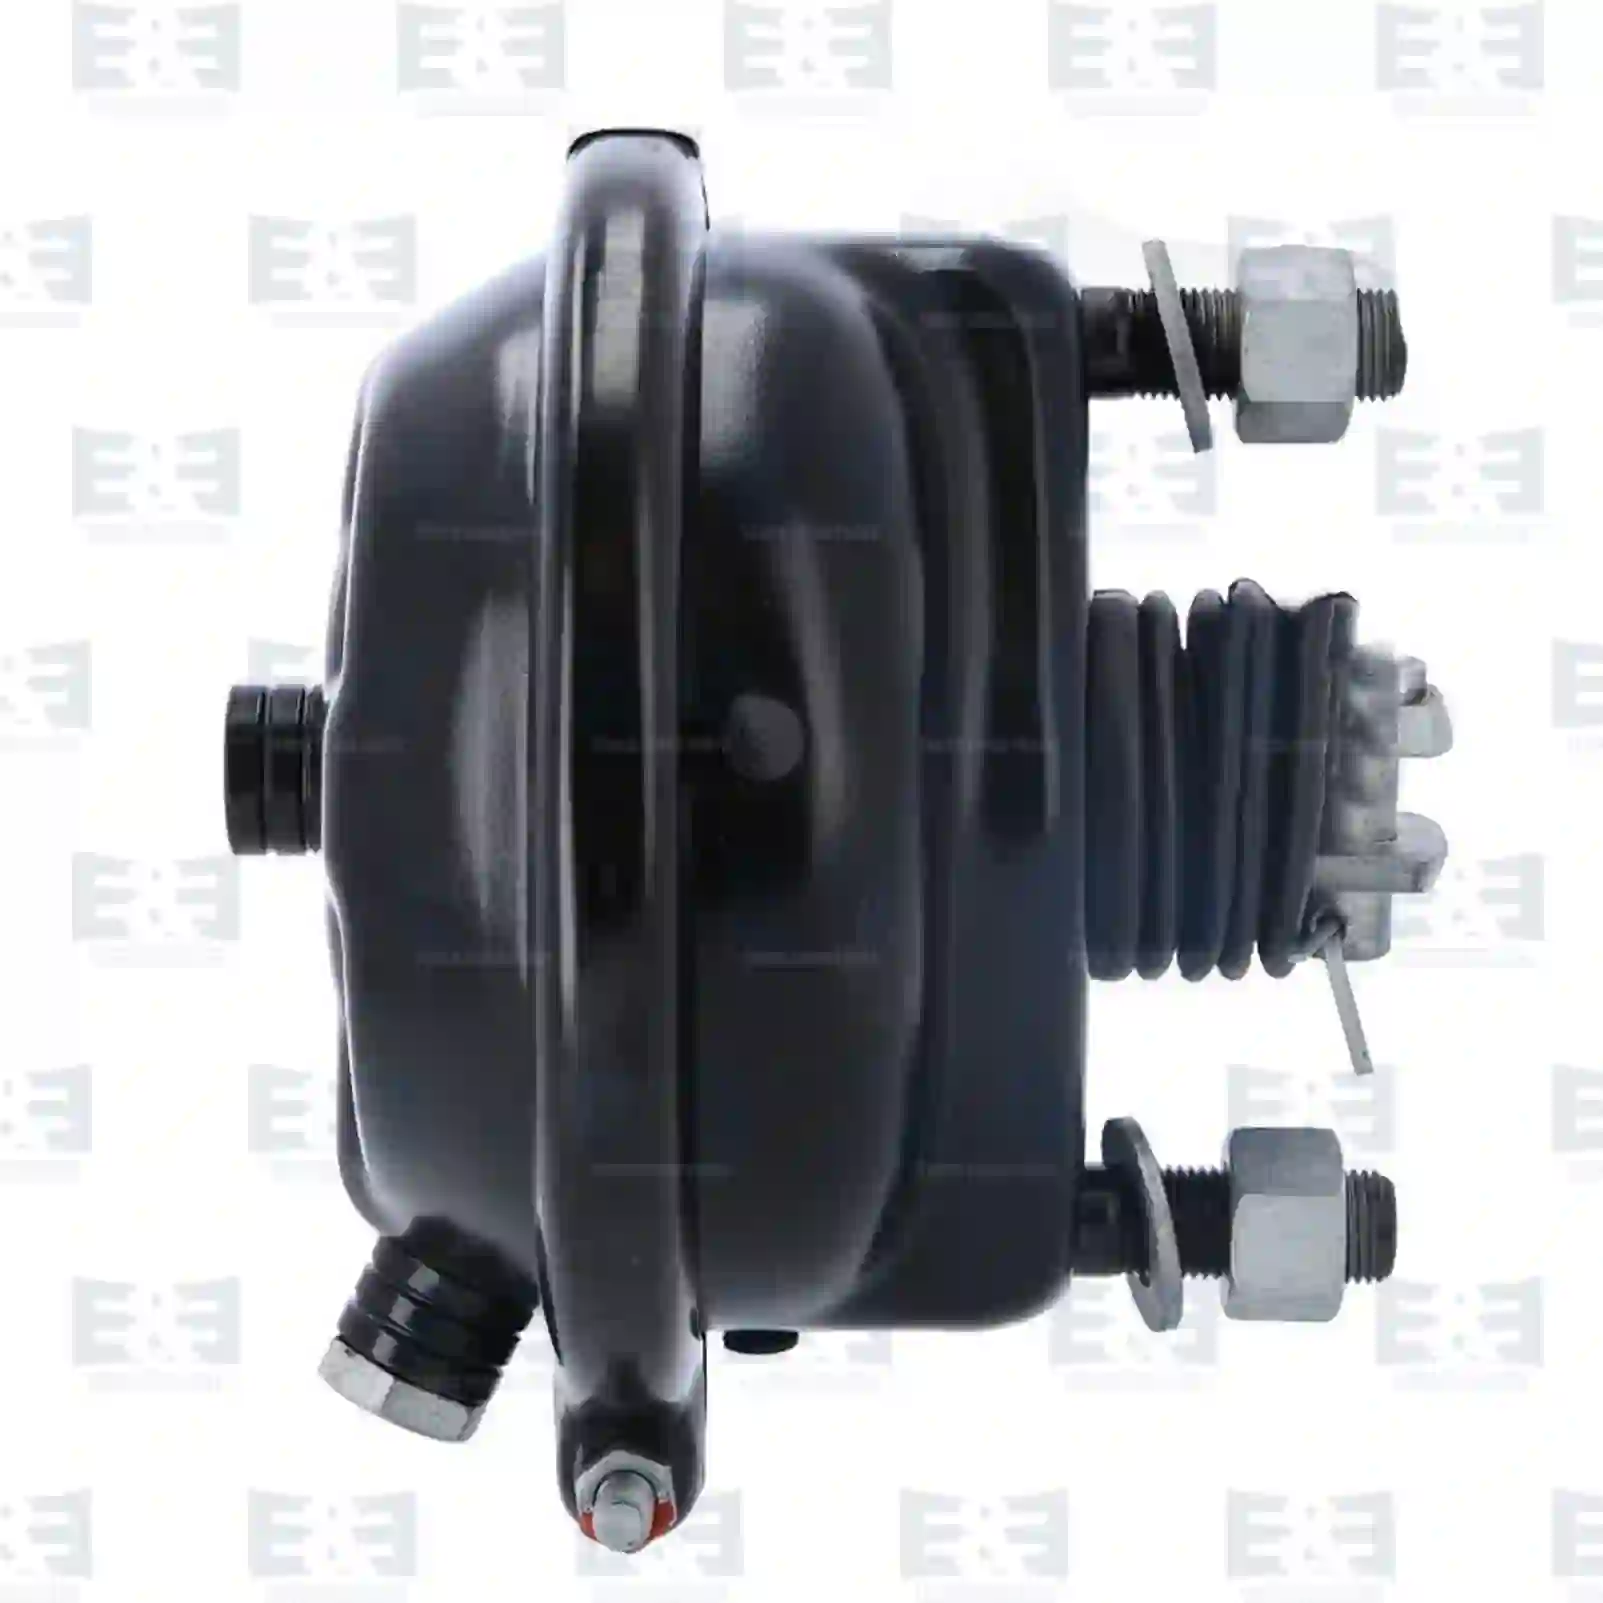 Brake Cylinders Brake cylinder, EE No 2E2295095 ,  oem no:1505026, MBU5172, 81511016196, 81511019196, 0004207624, 0054202018, 0064209418, 0074203218, 0074208718, 0074208918, 0074209718, 5021170048 E&E Truck Spare Parts | Truck Spare Parts, Auotomotive Spare Parts